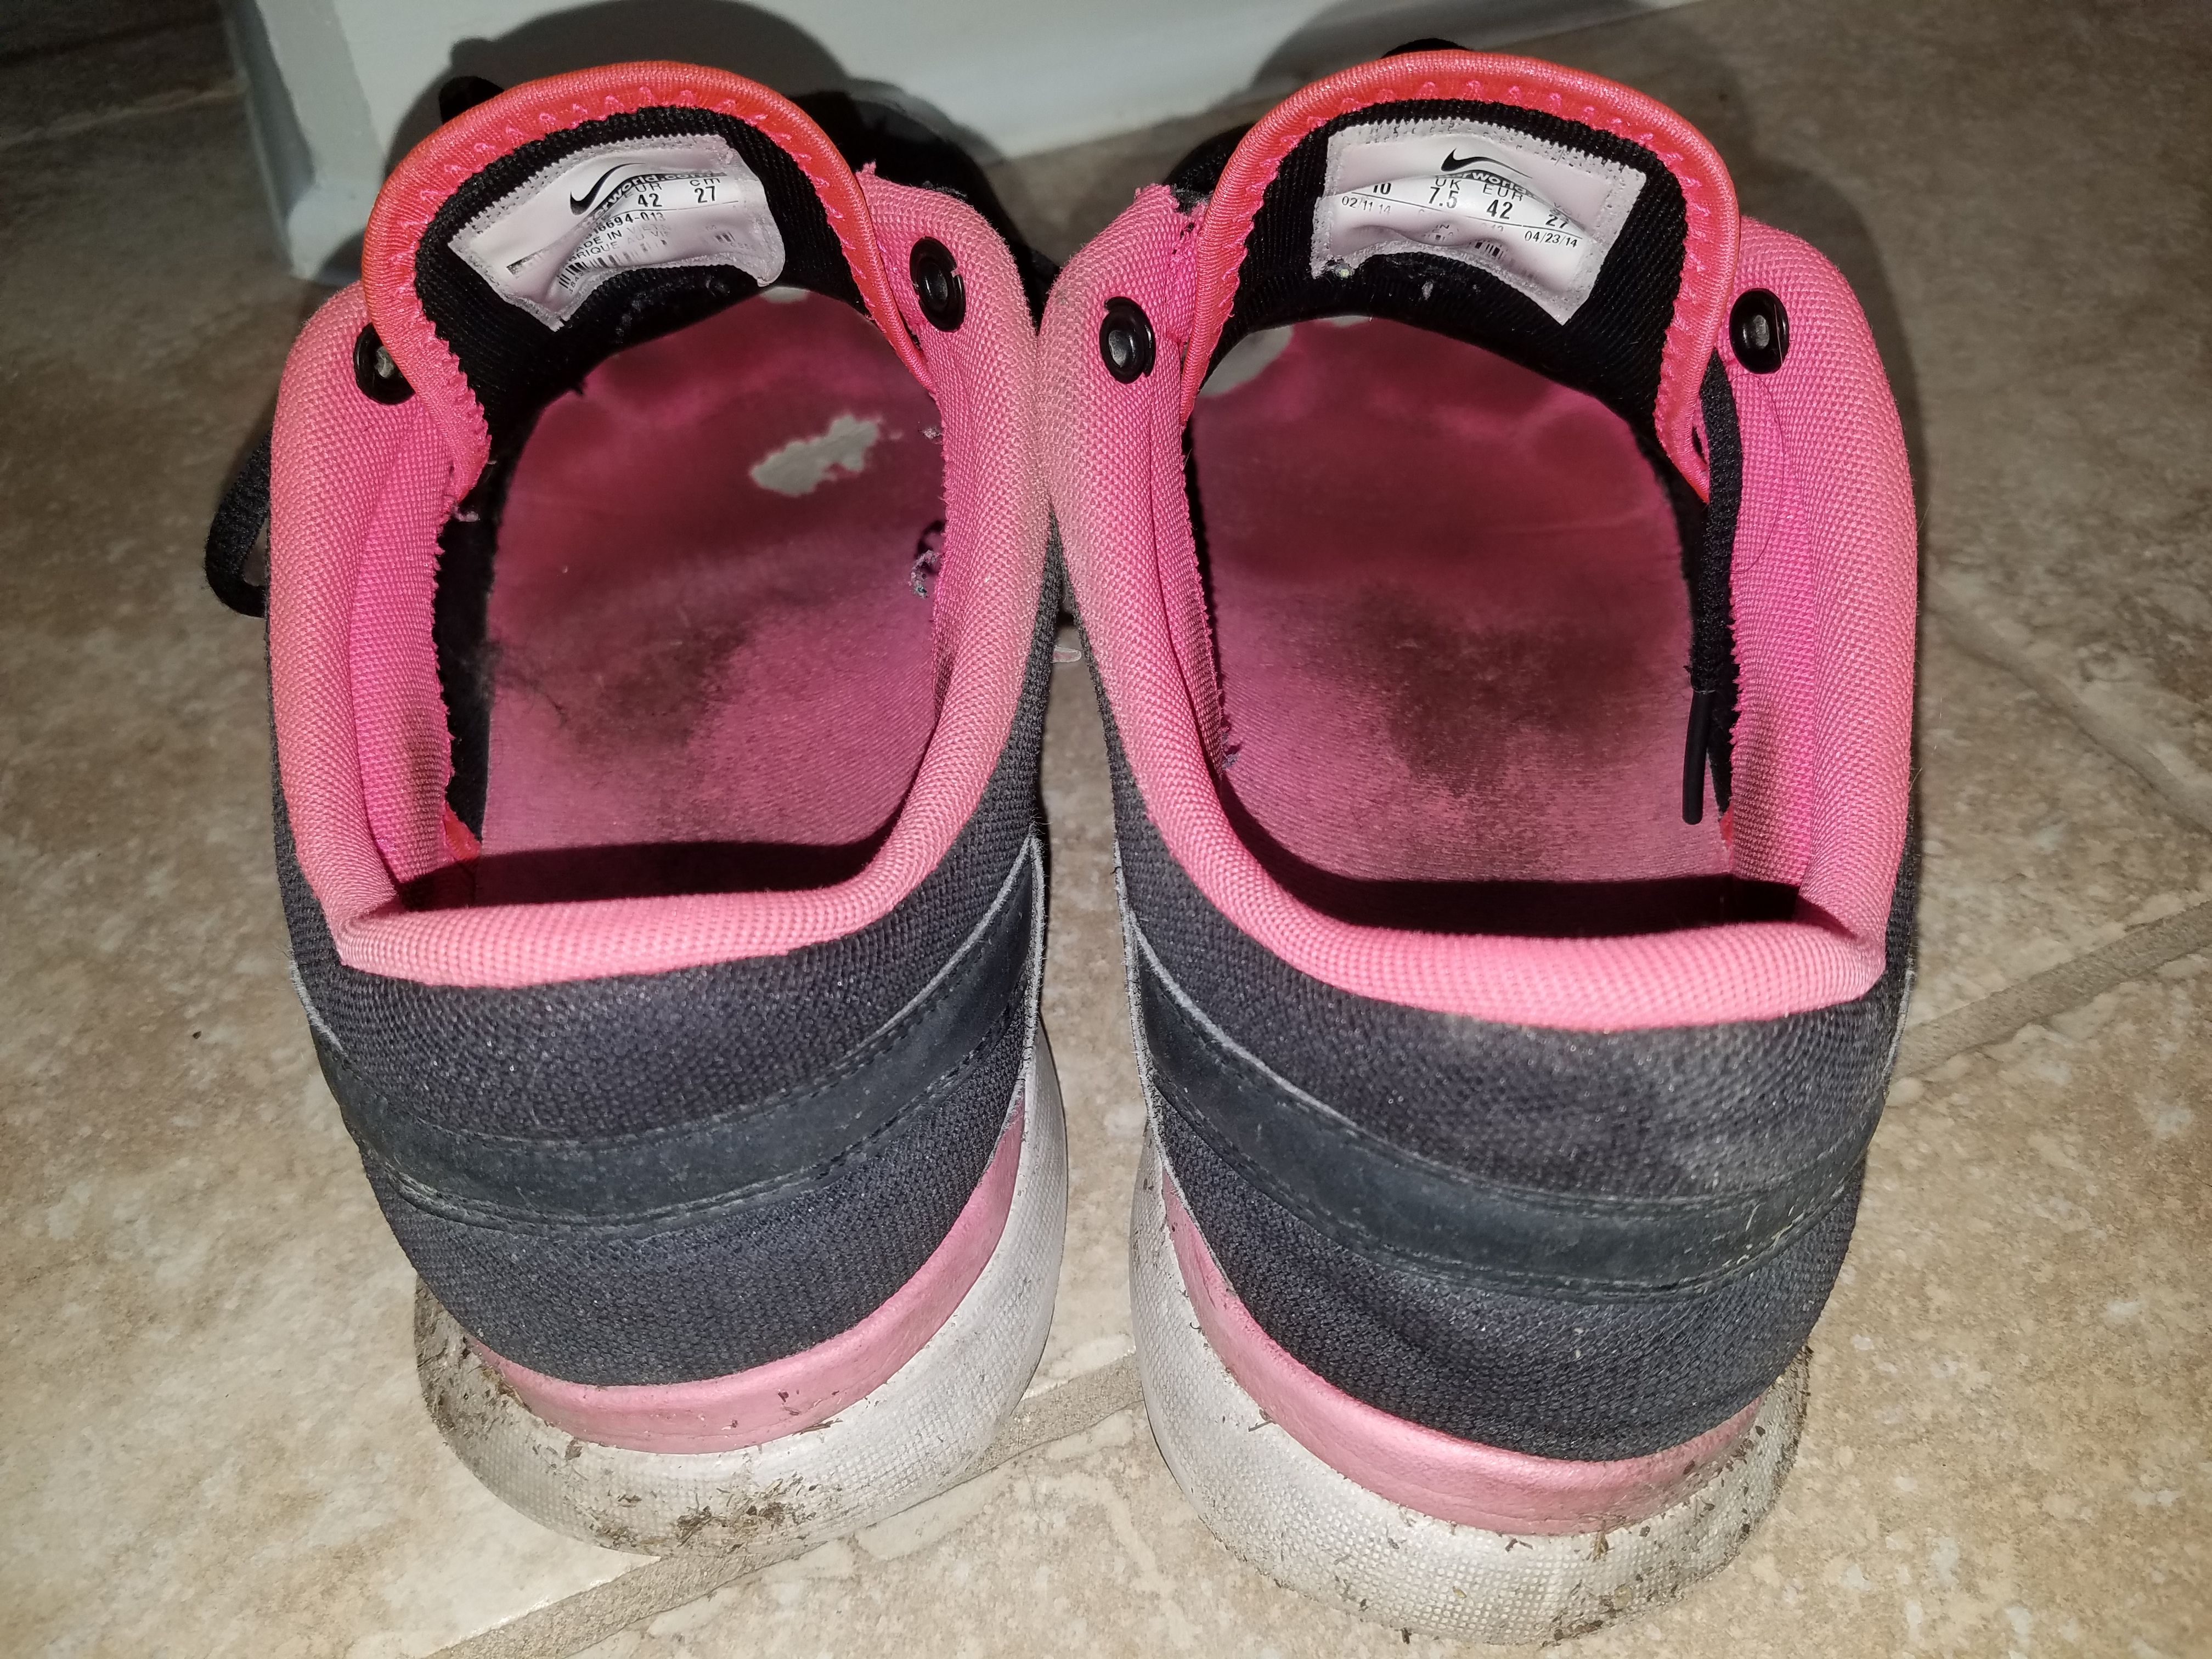 Well worn (trashed) Women's shoes for Sale in San Antonio, TX - OfferUp